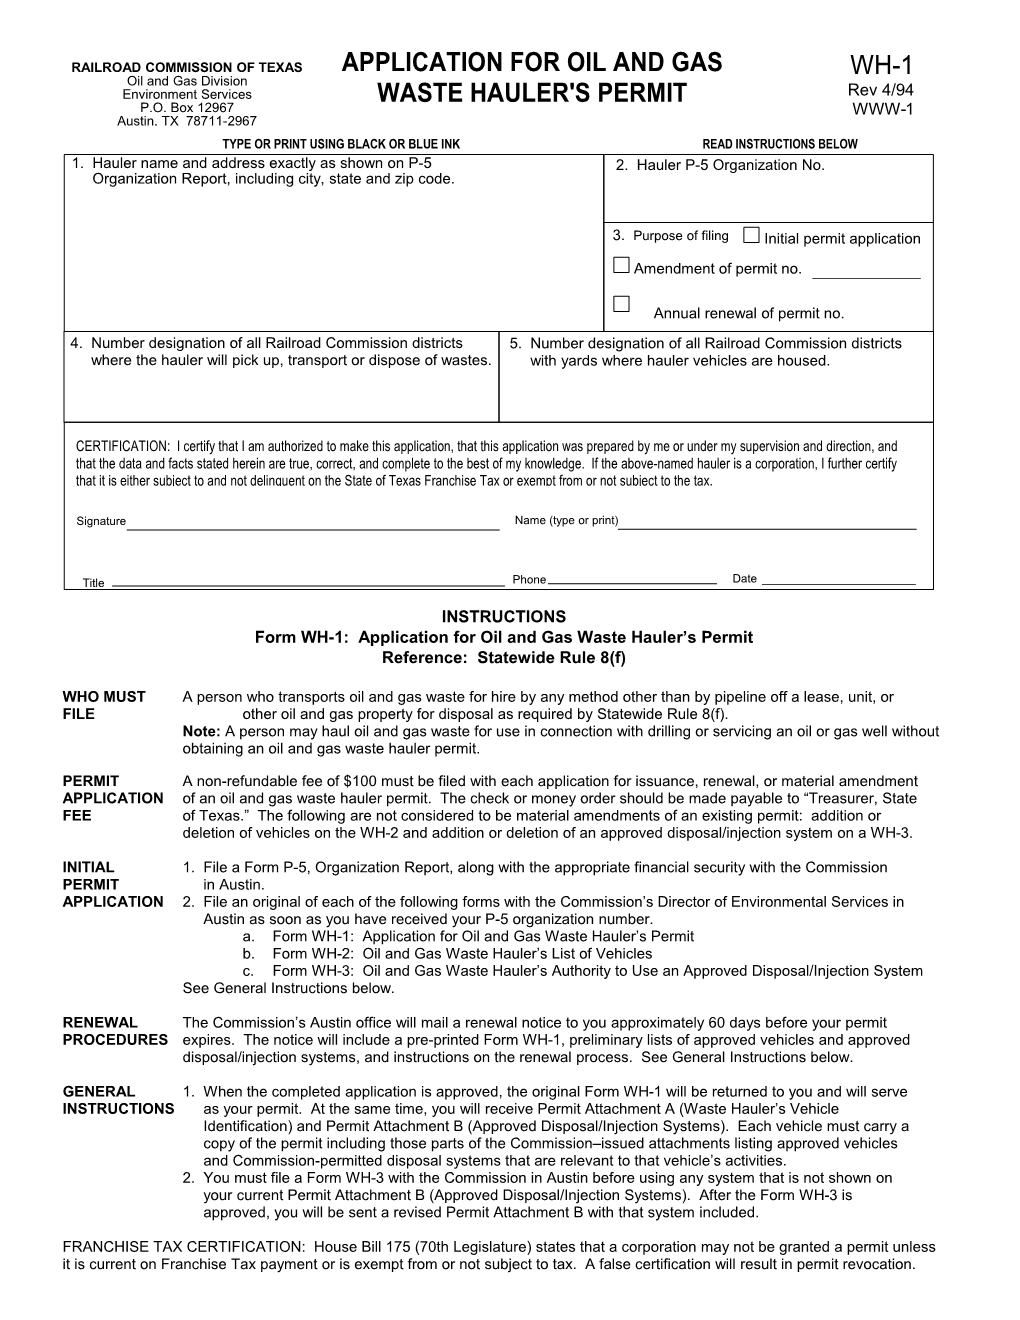 Initial Permit Application